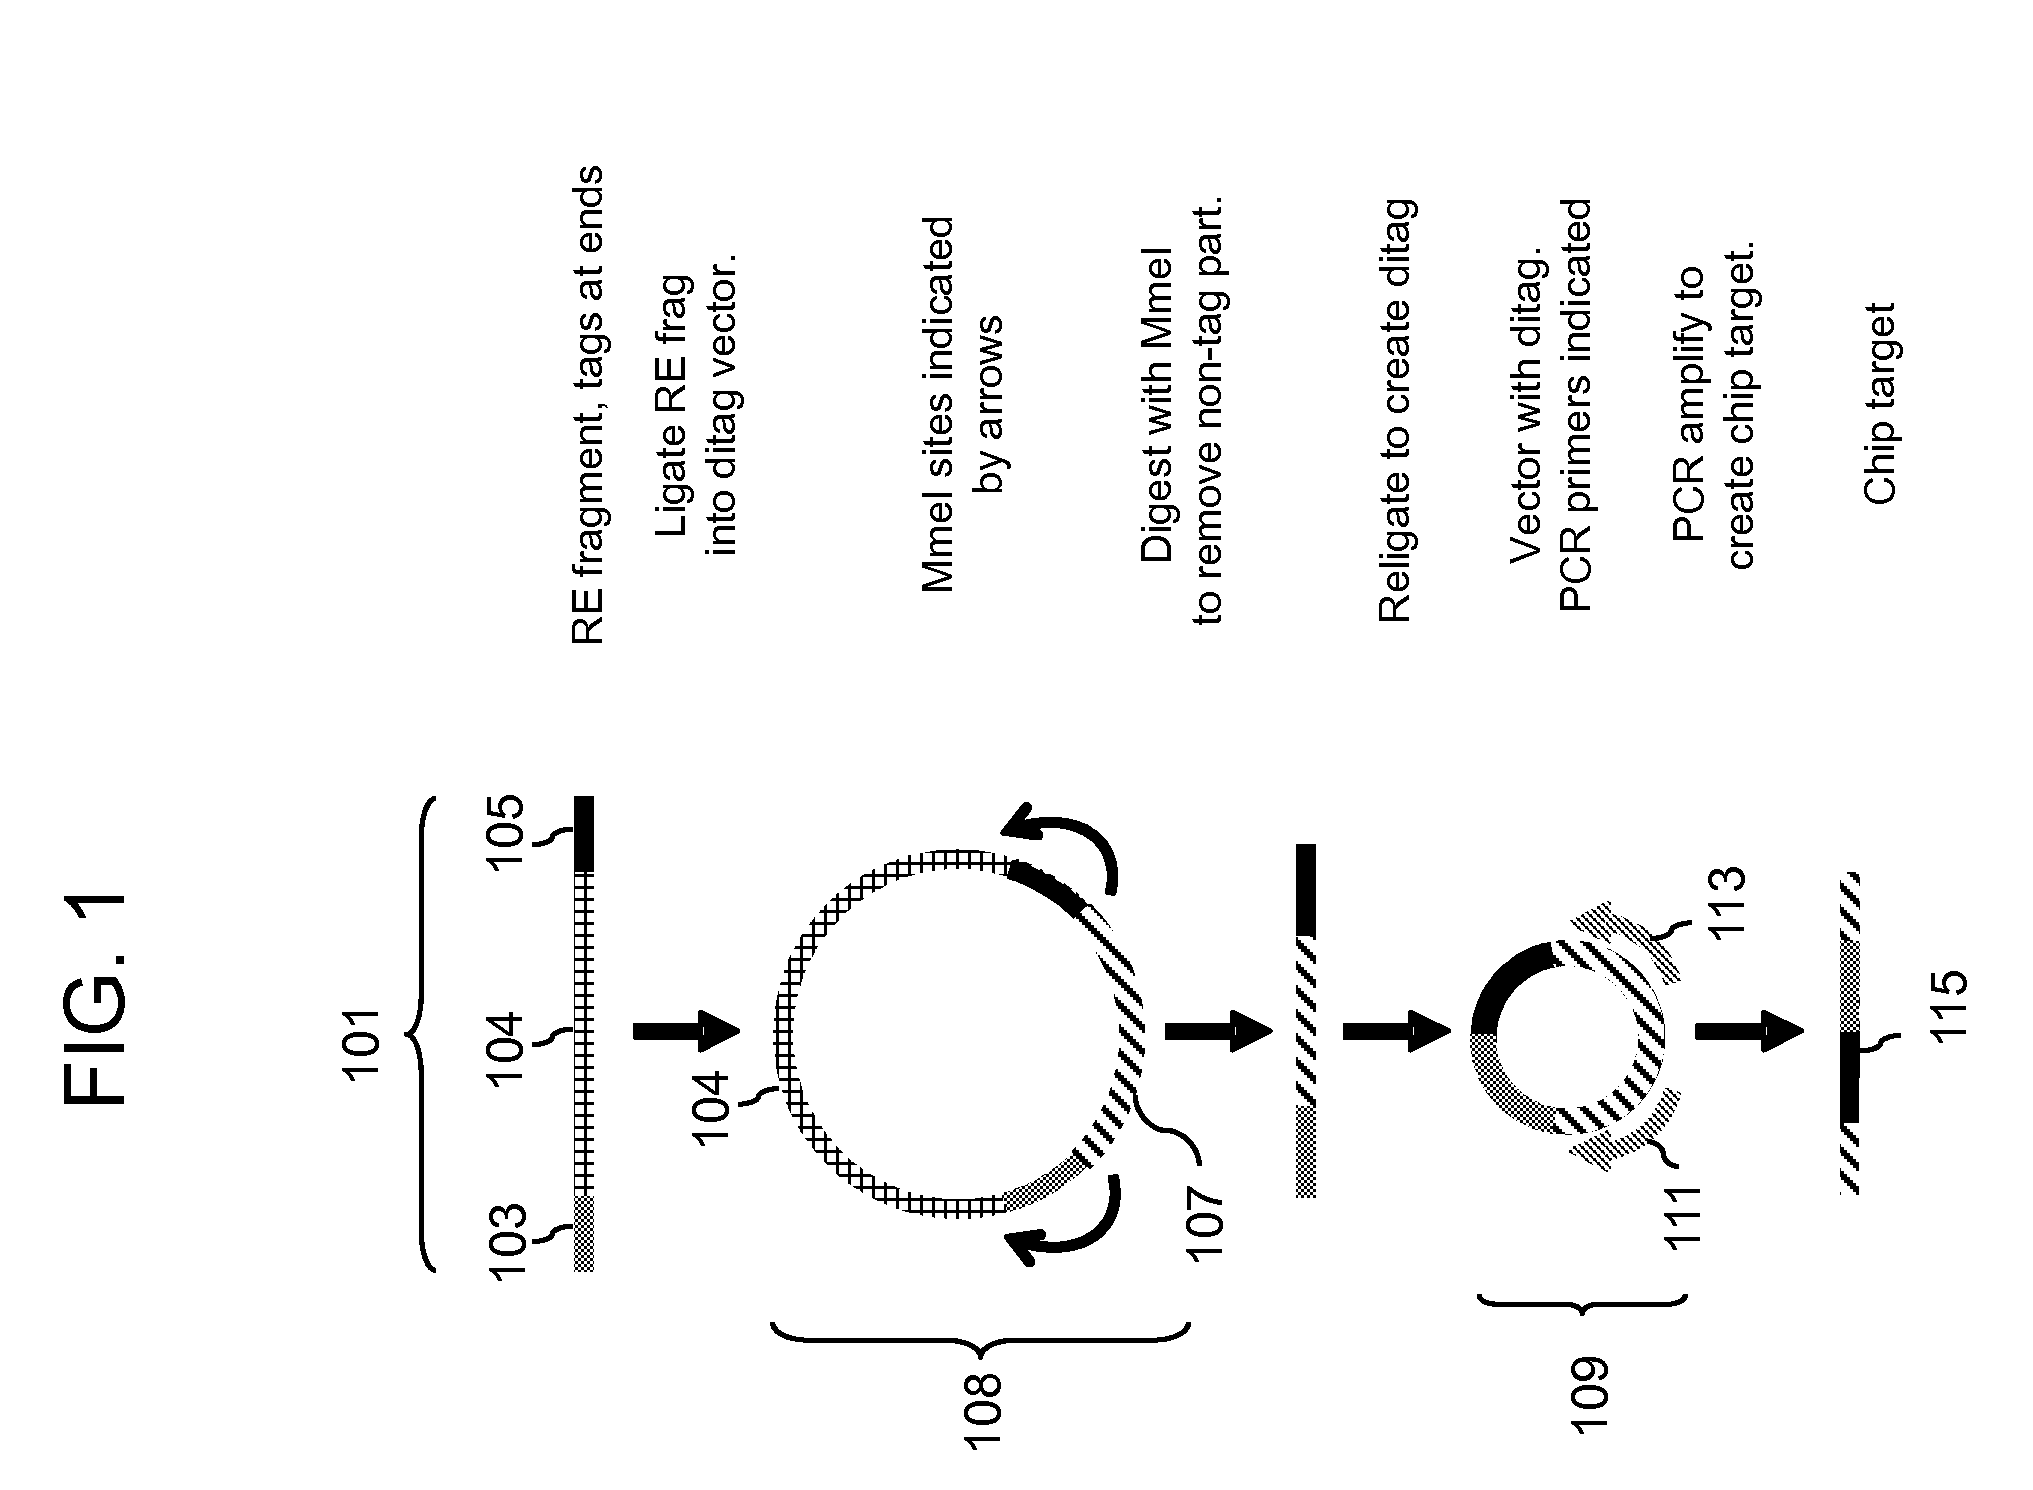 Array-based translocation and rearrangement assays